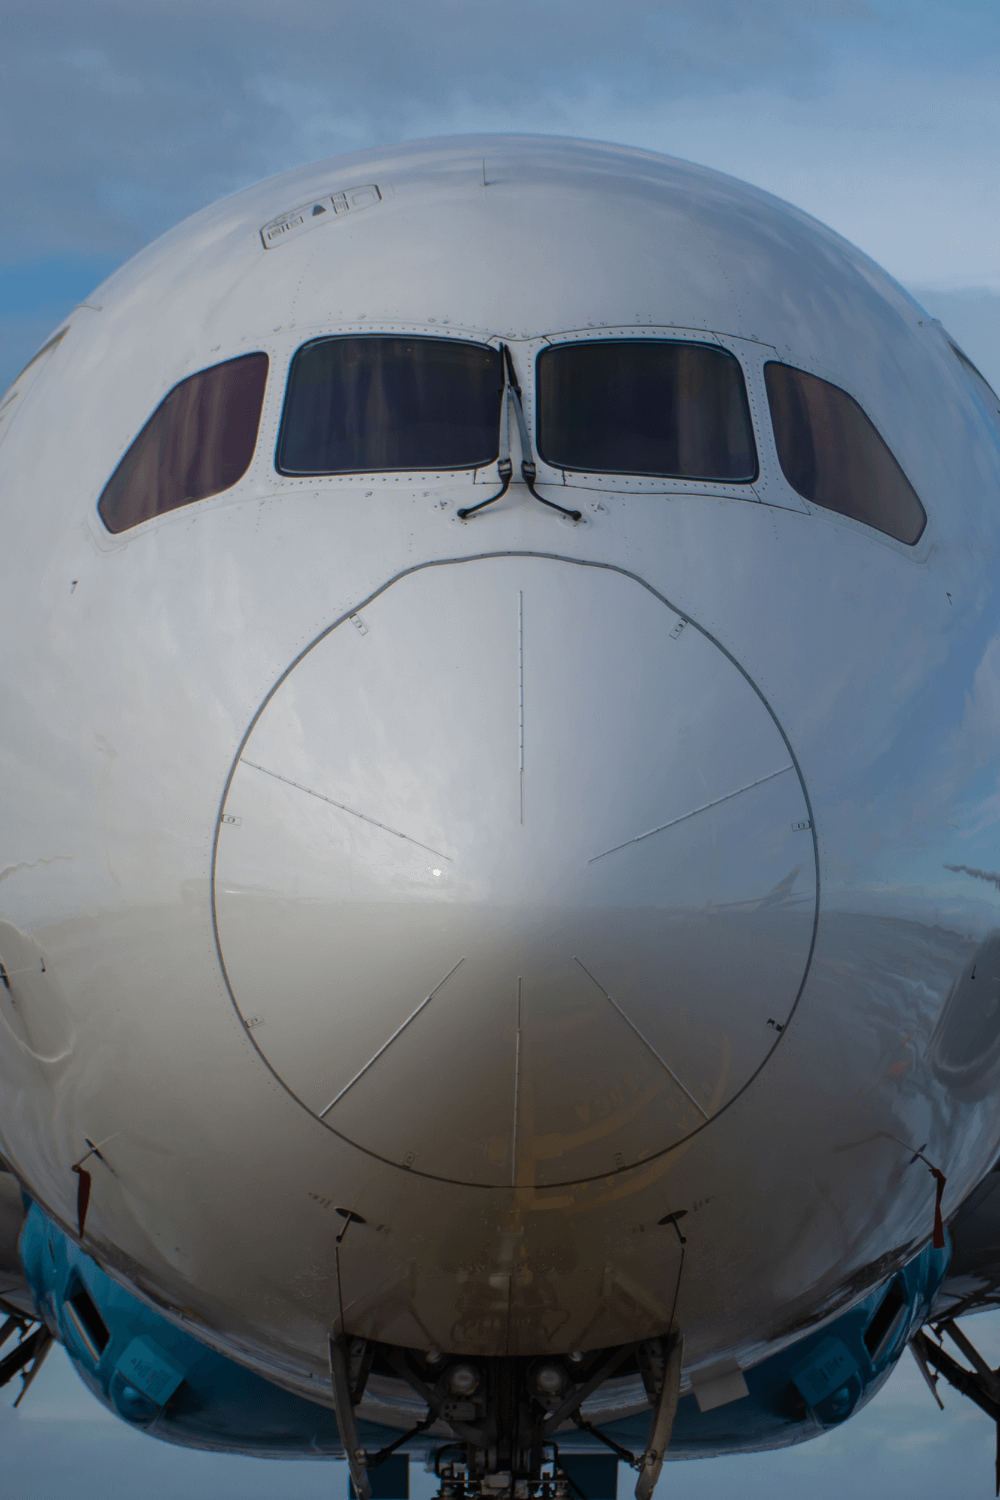 An airplane at Boeings Factory in Everett Washington close up upon the nose. The cone of the plane adds texture while four windows from the flight deck seem to pear out.